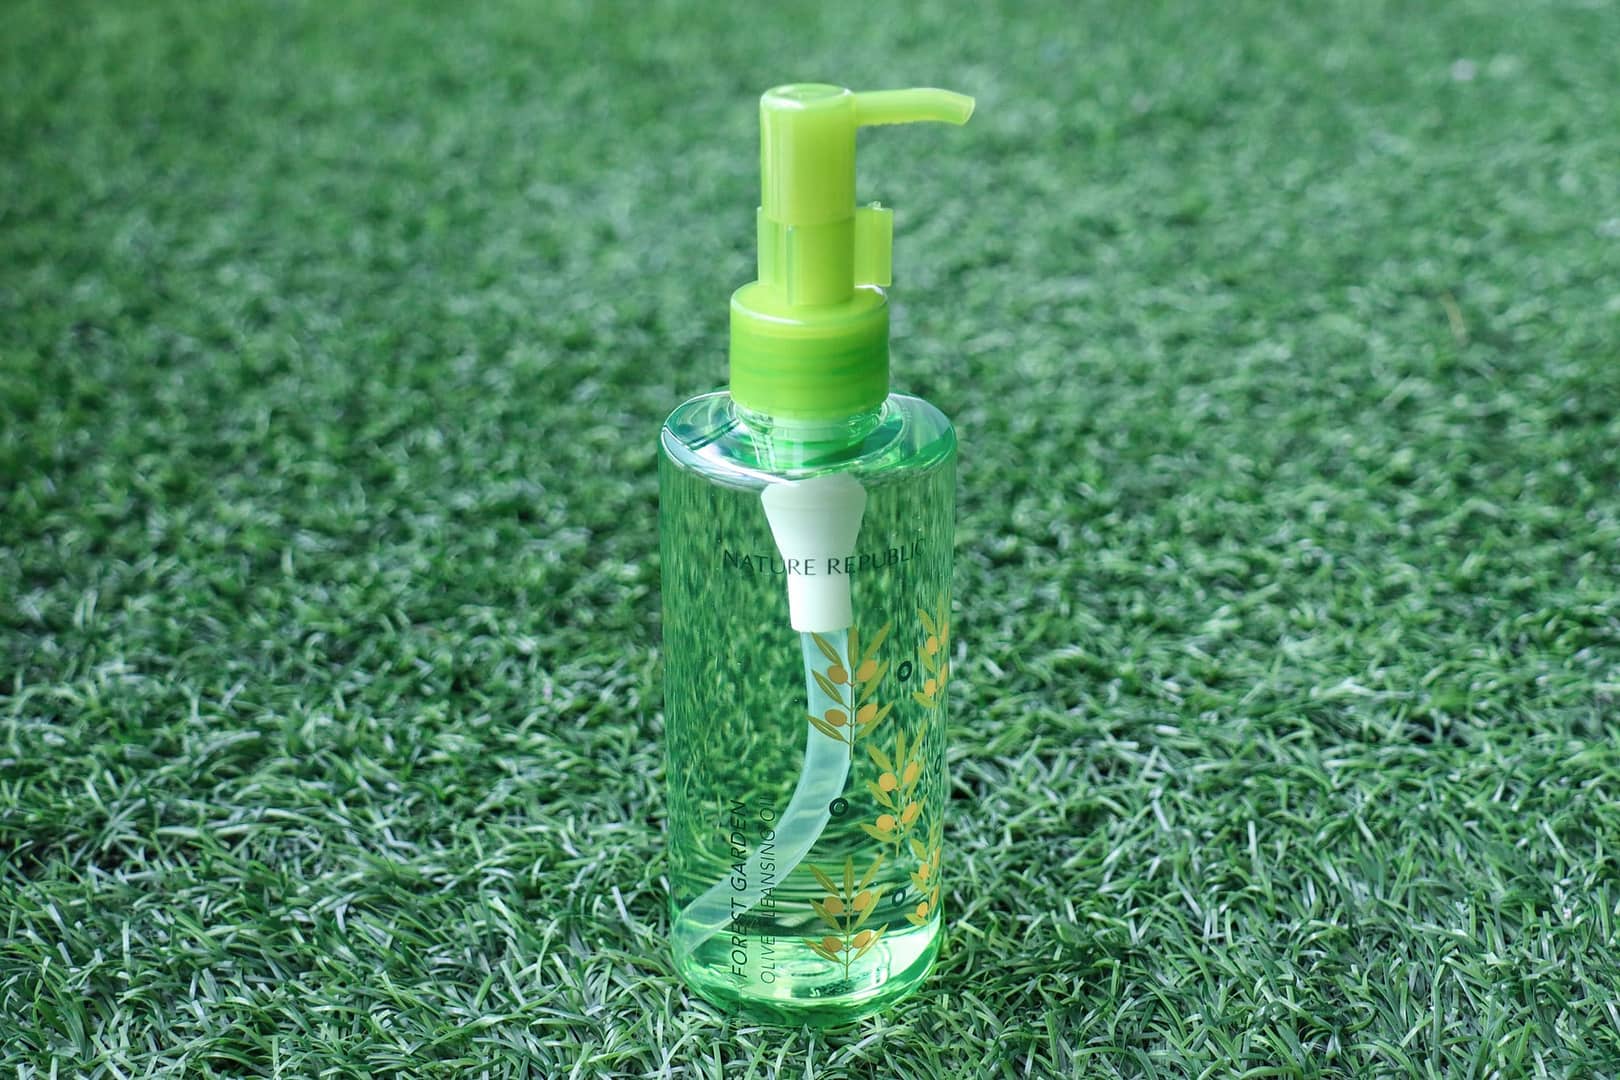 Nature Republic Forest Garden Cleansing Oil